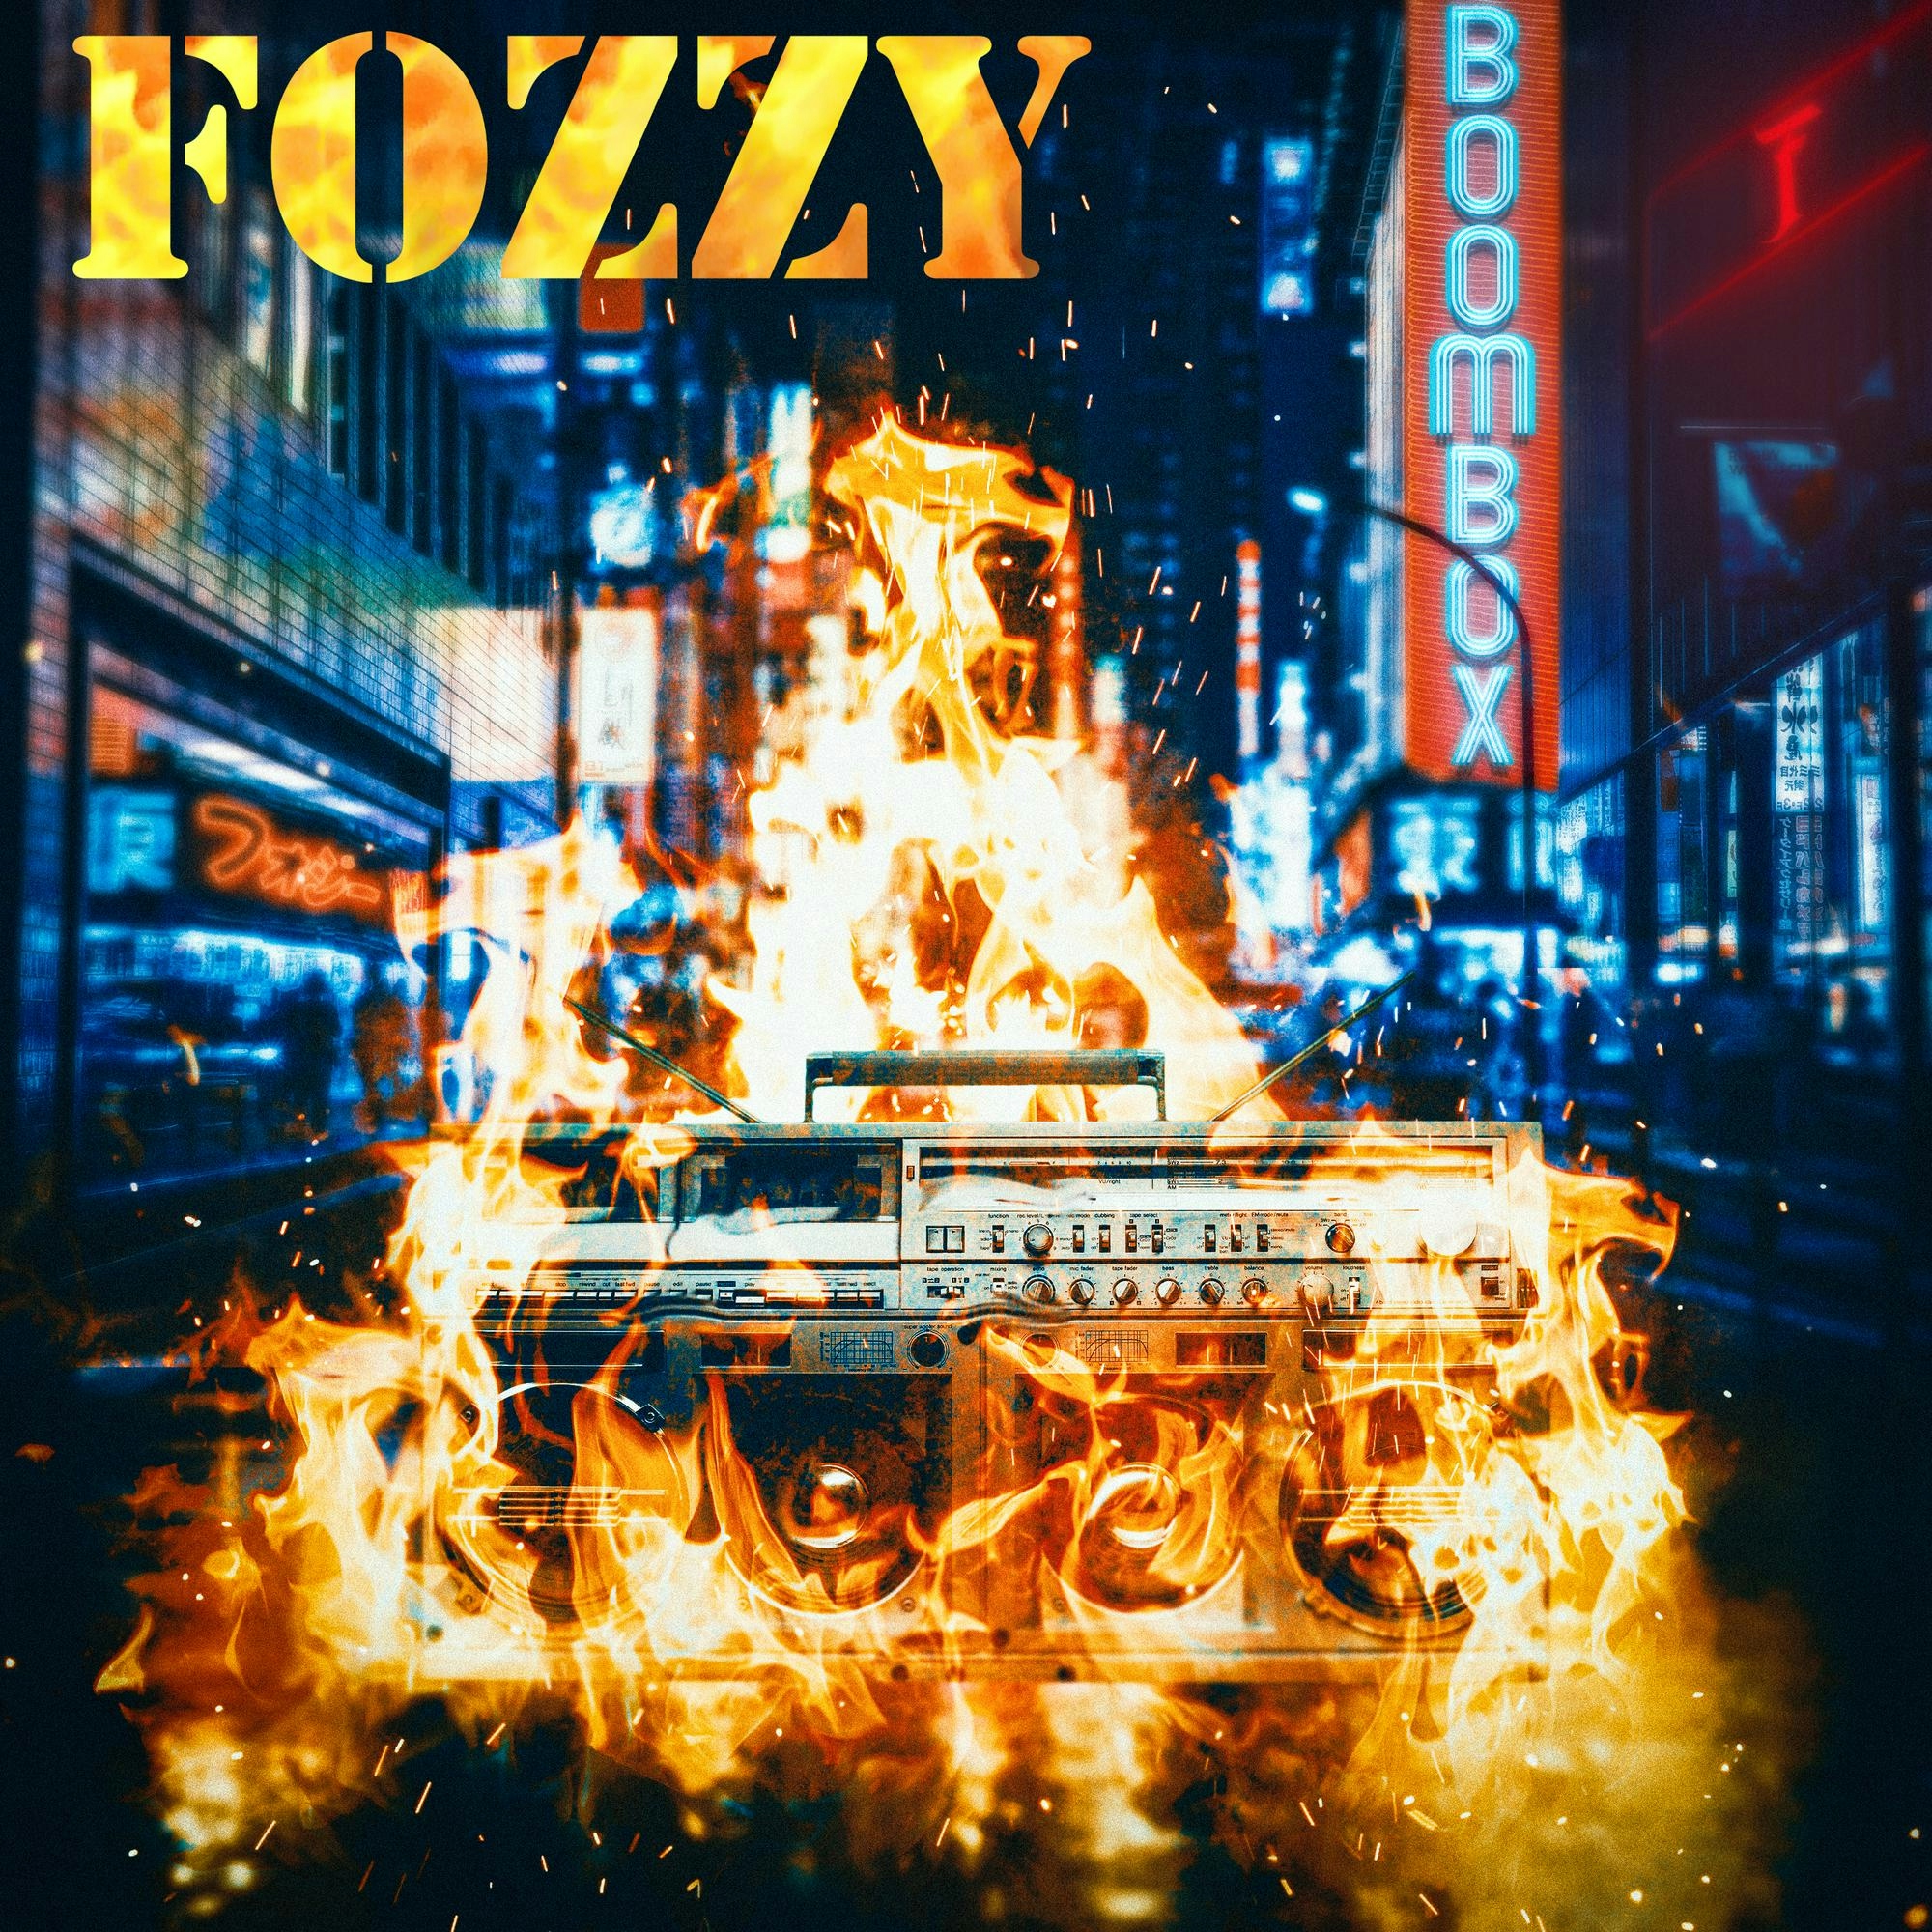 Album artwork for Album artwork for Boombox by Fozzy by Boombox - Fozzy